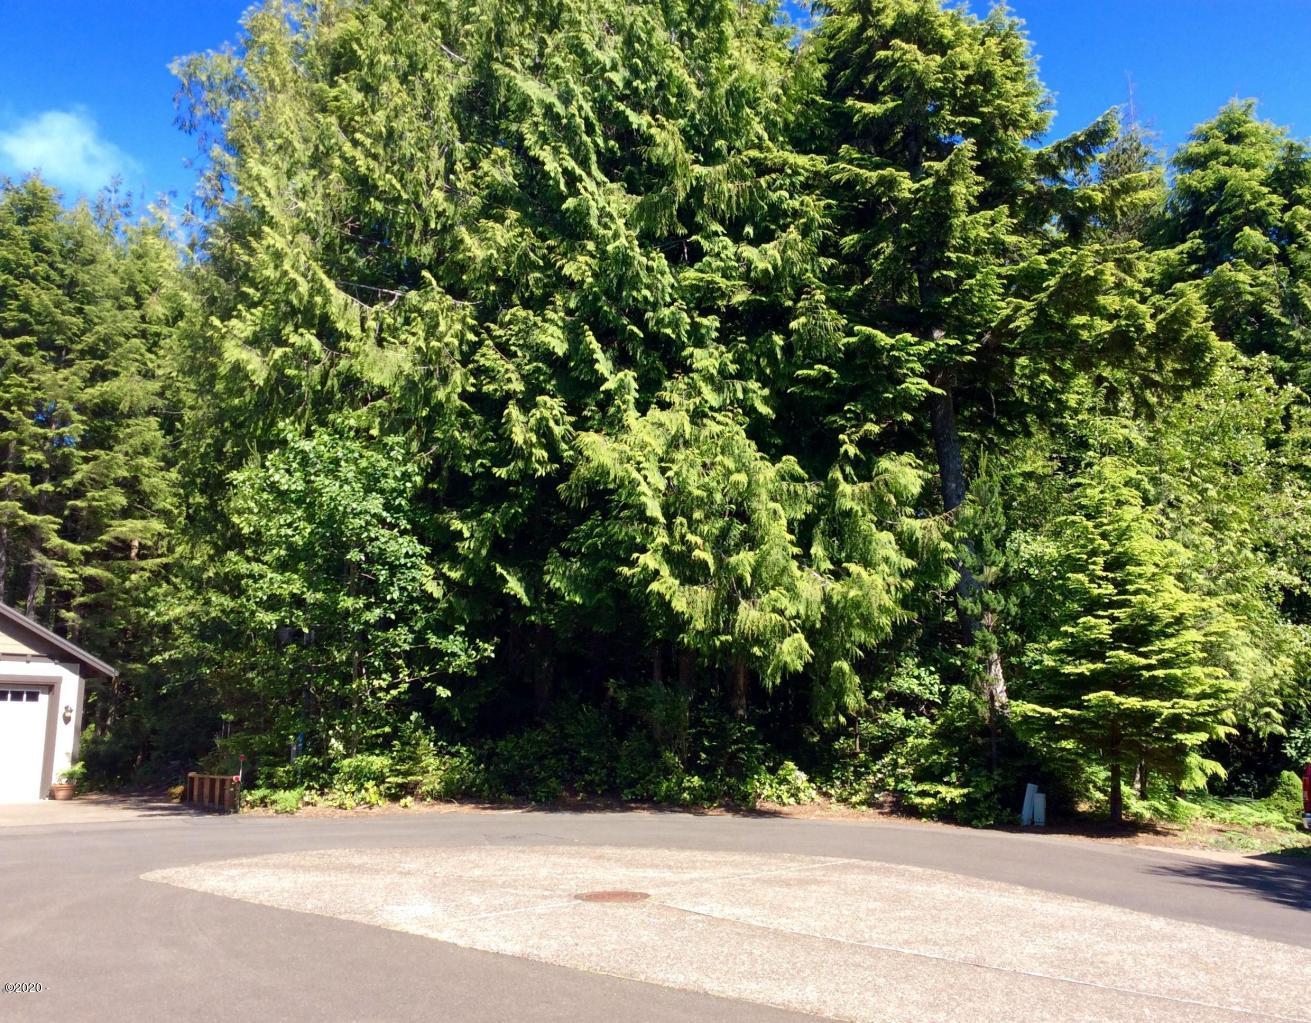 Lot 162 SW Cormorant Depoe Bay, Gleneden Beach, Lincoln City, Newport, Otis, Rose Lodge, Seal Rock, Waldport, Yachats, To Home Listings - Amy Plechaty, Emerald Coast Realty Real Estate, homes for sale, property for sale